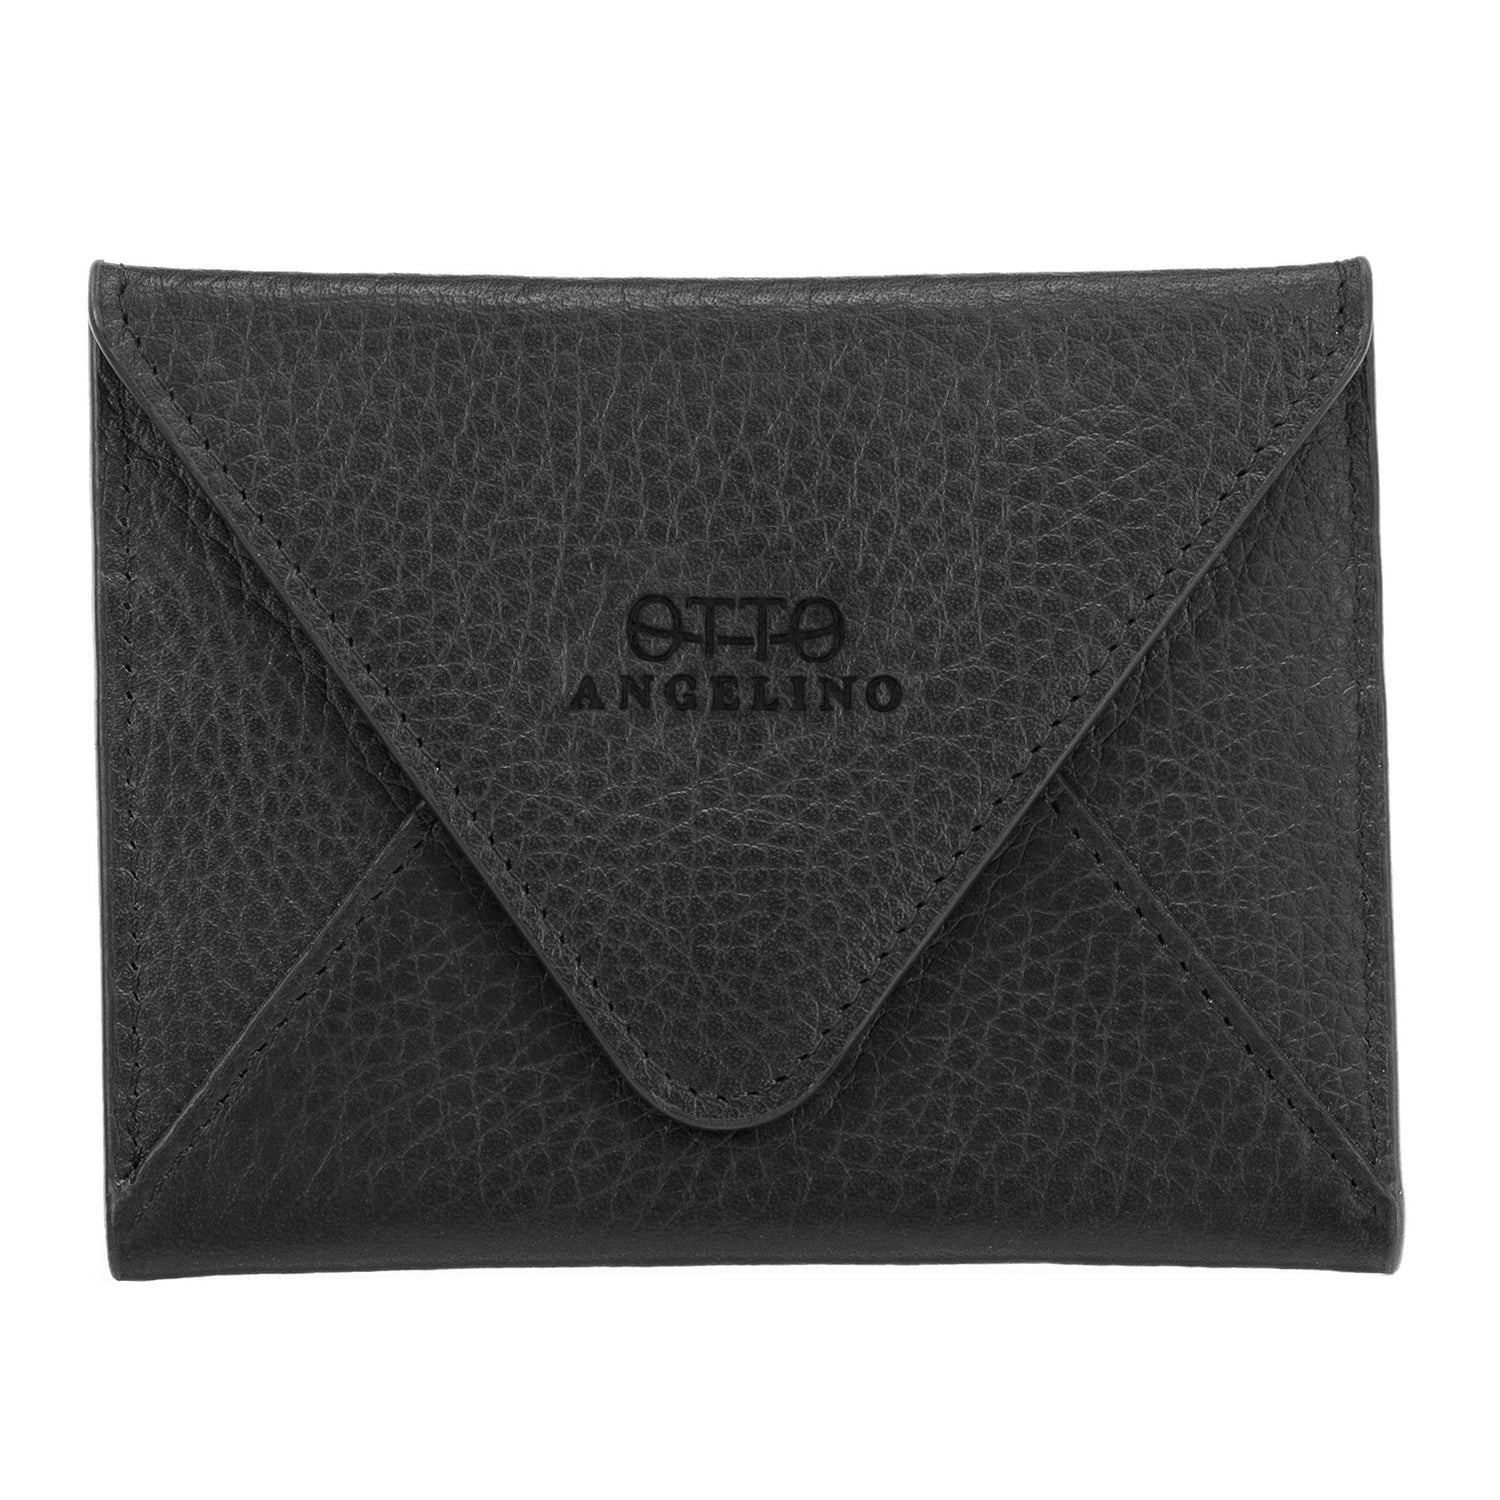 Otto Angelino Top Grain Leather Zippered ID Wallet with Wrist